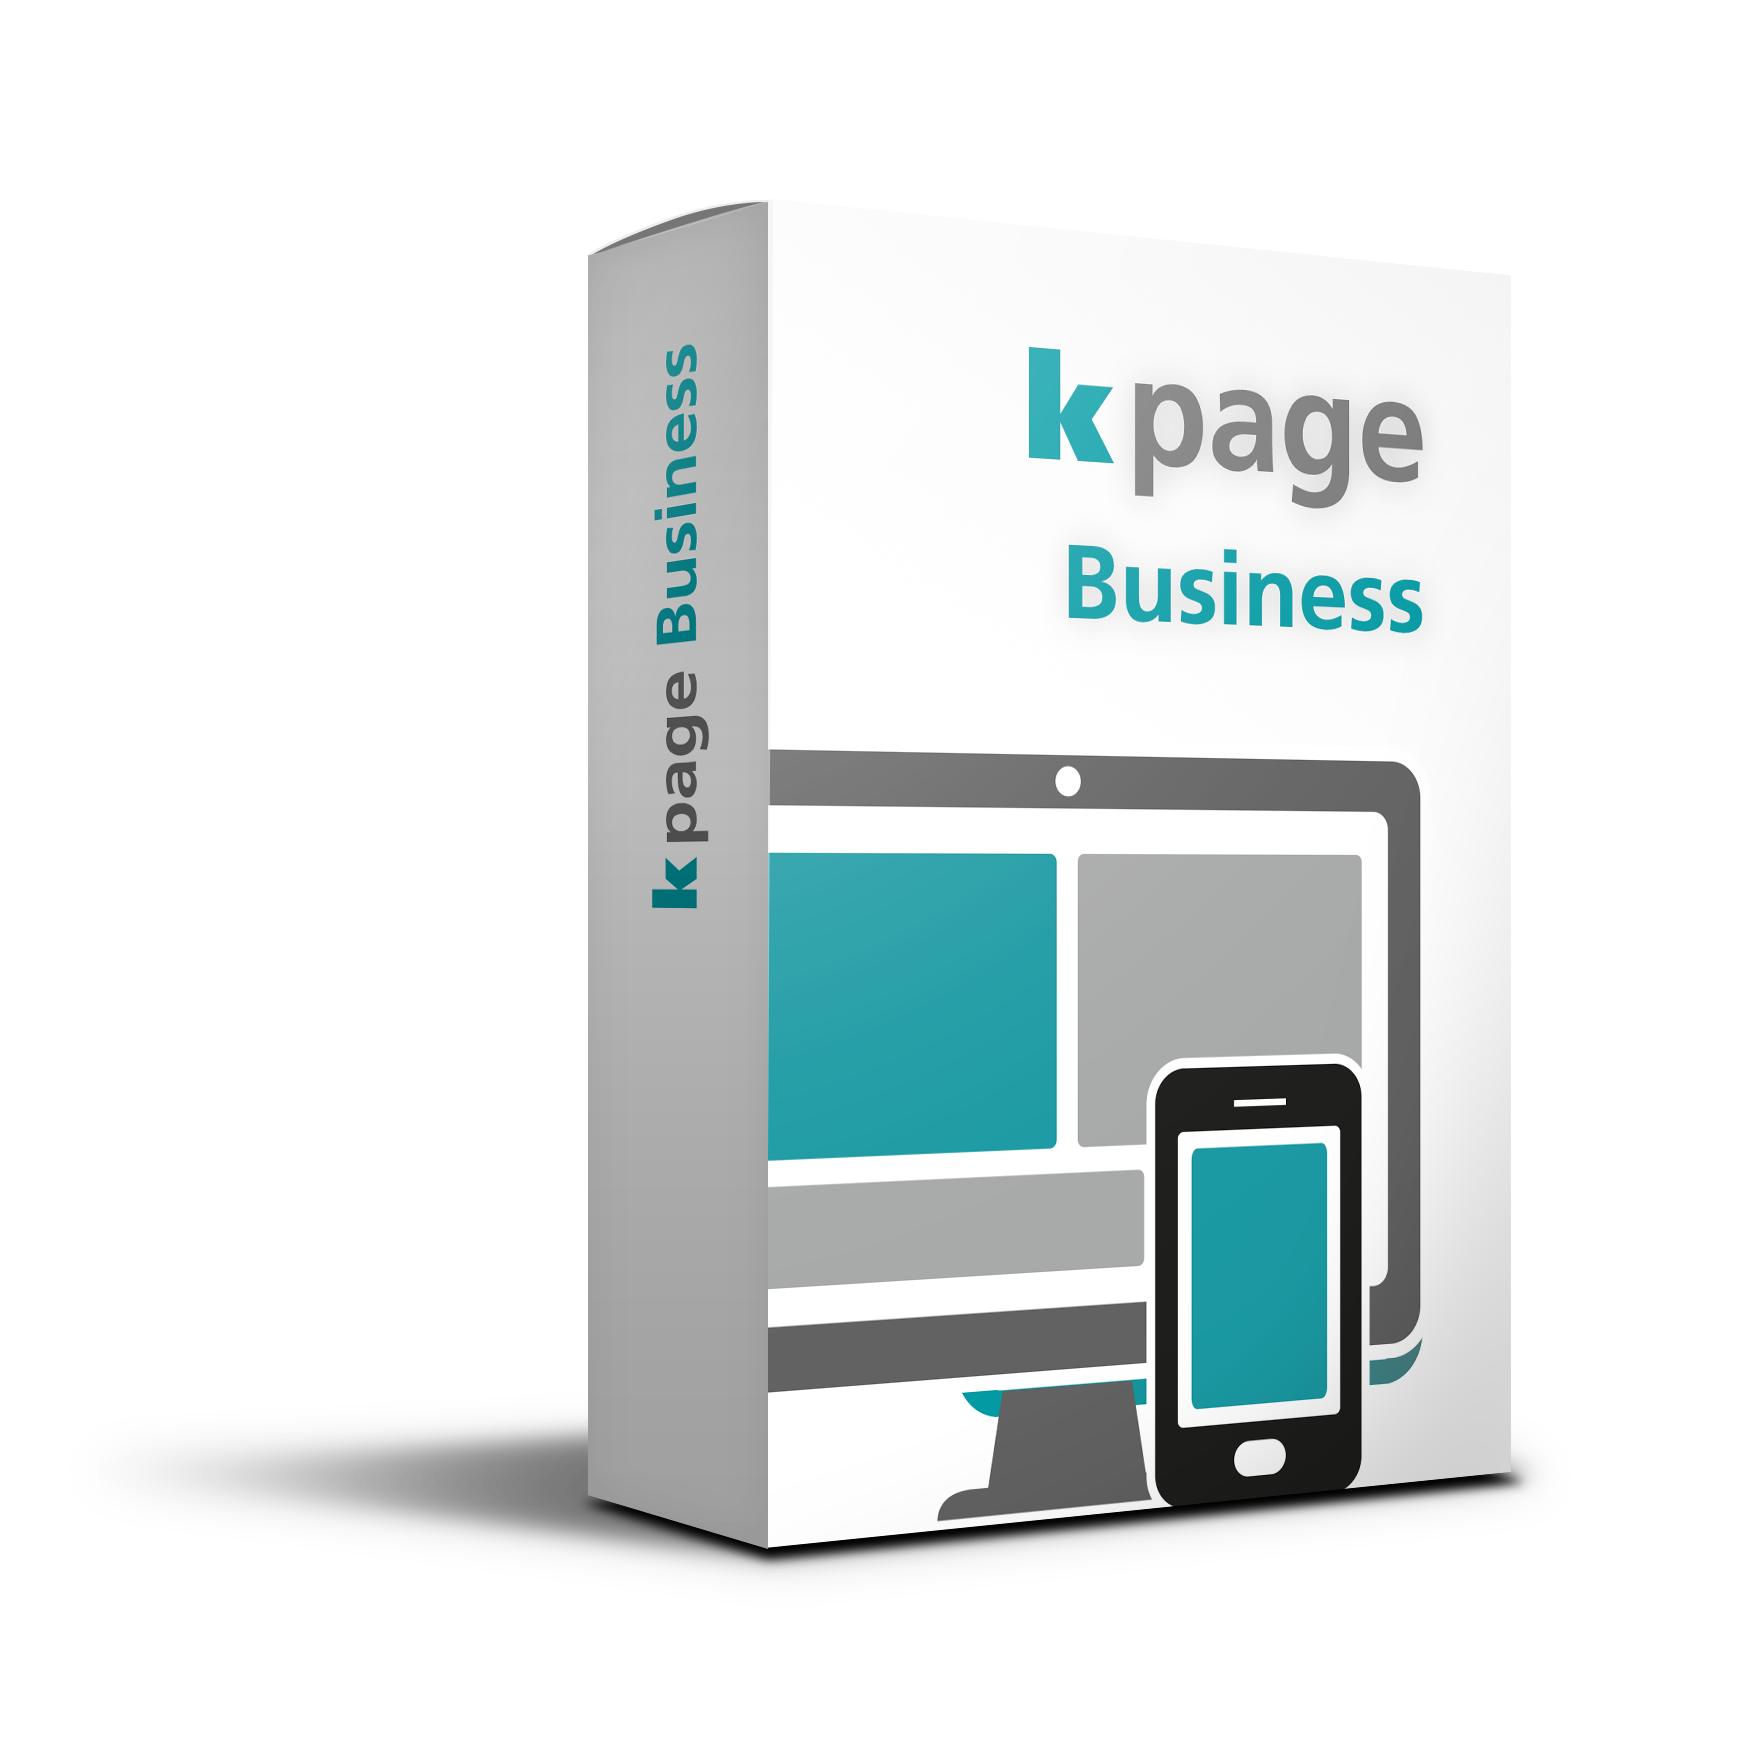 kpage Business